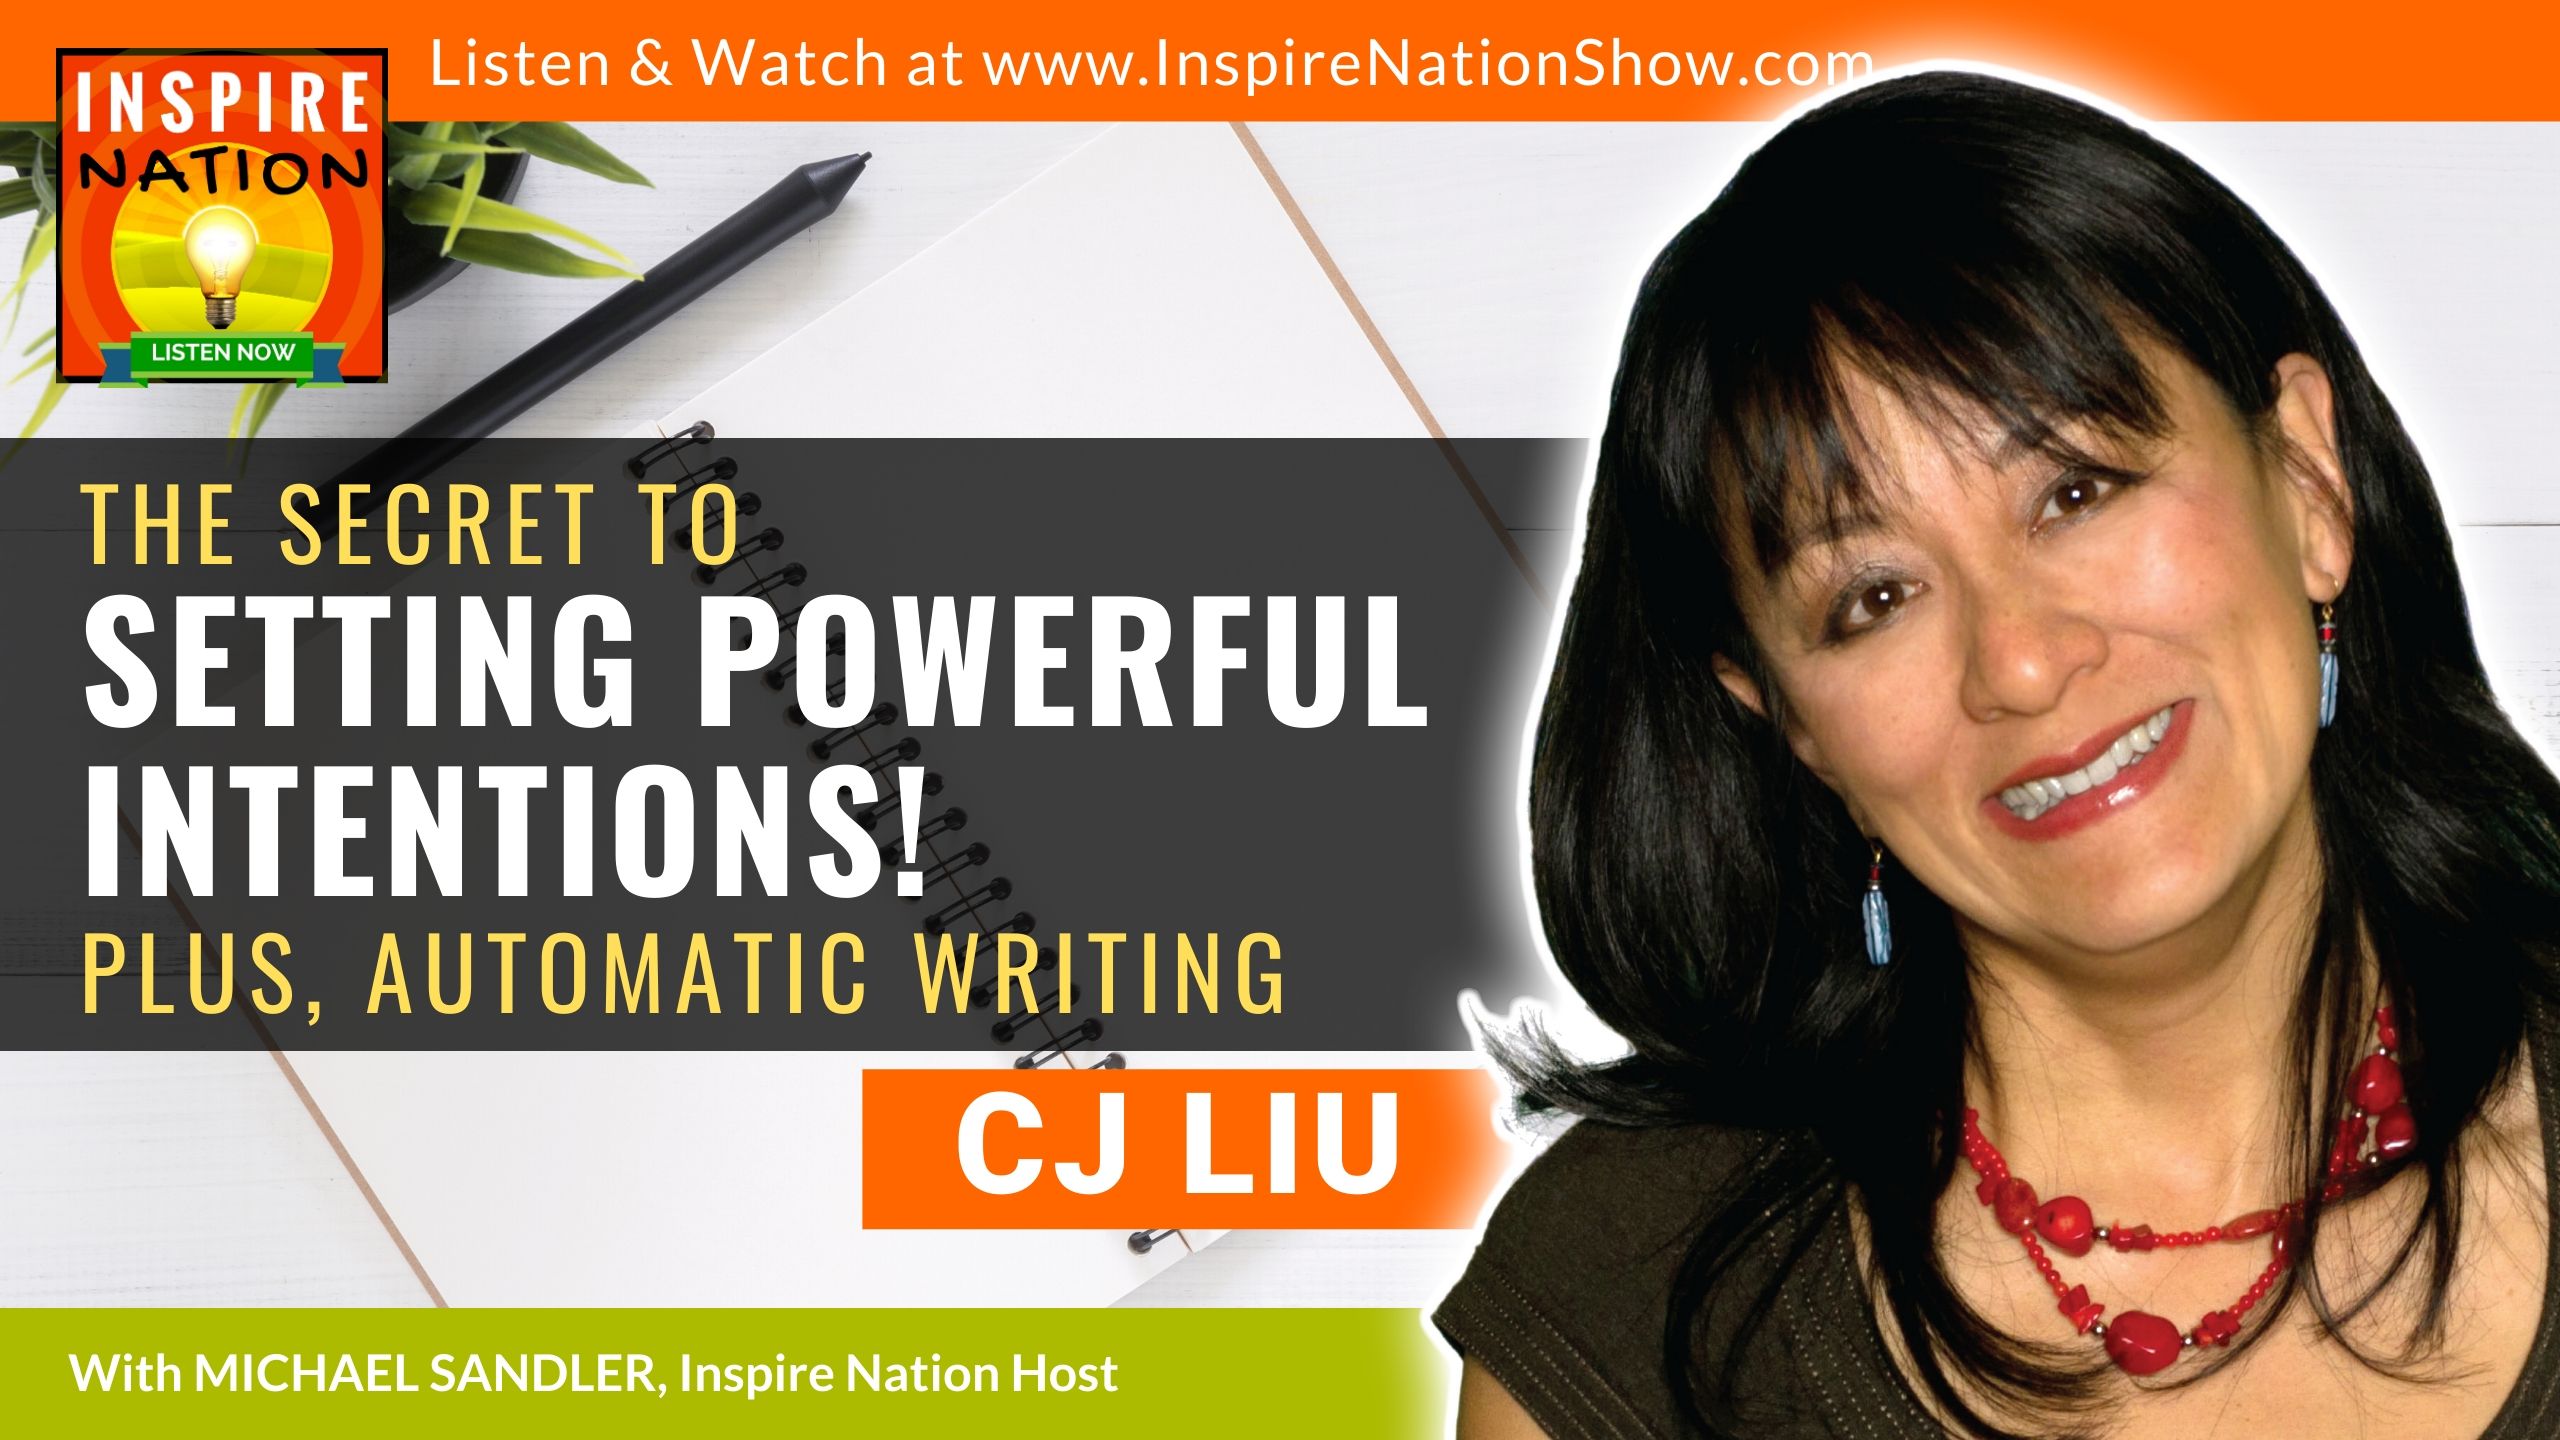 Michael Sandler and CJ Liu talk about the tools they use to set powerful intentions, including automatic writing or intuitive writing!